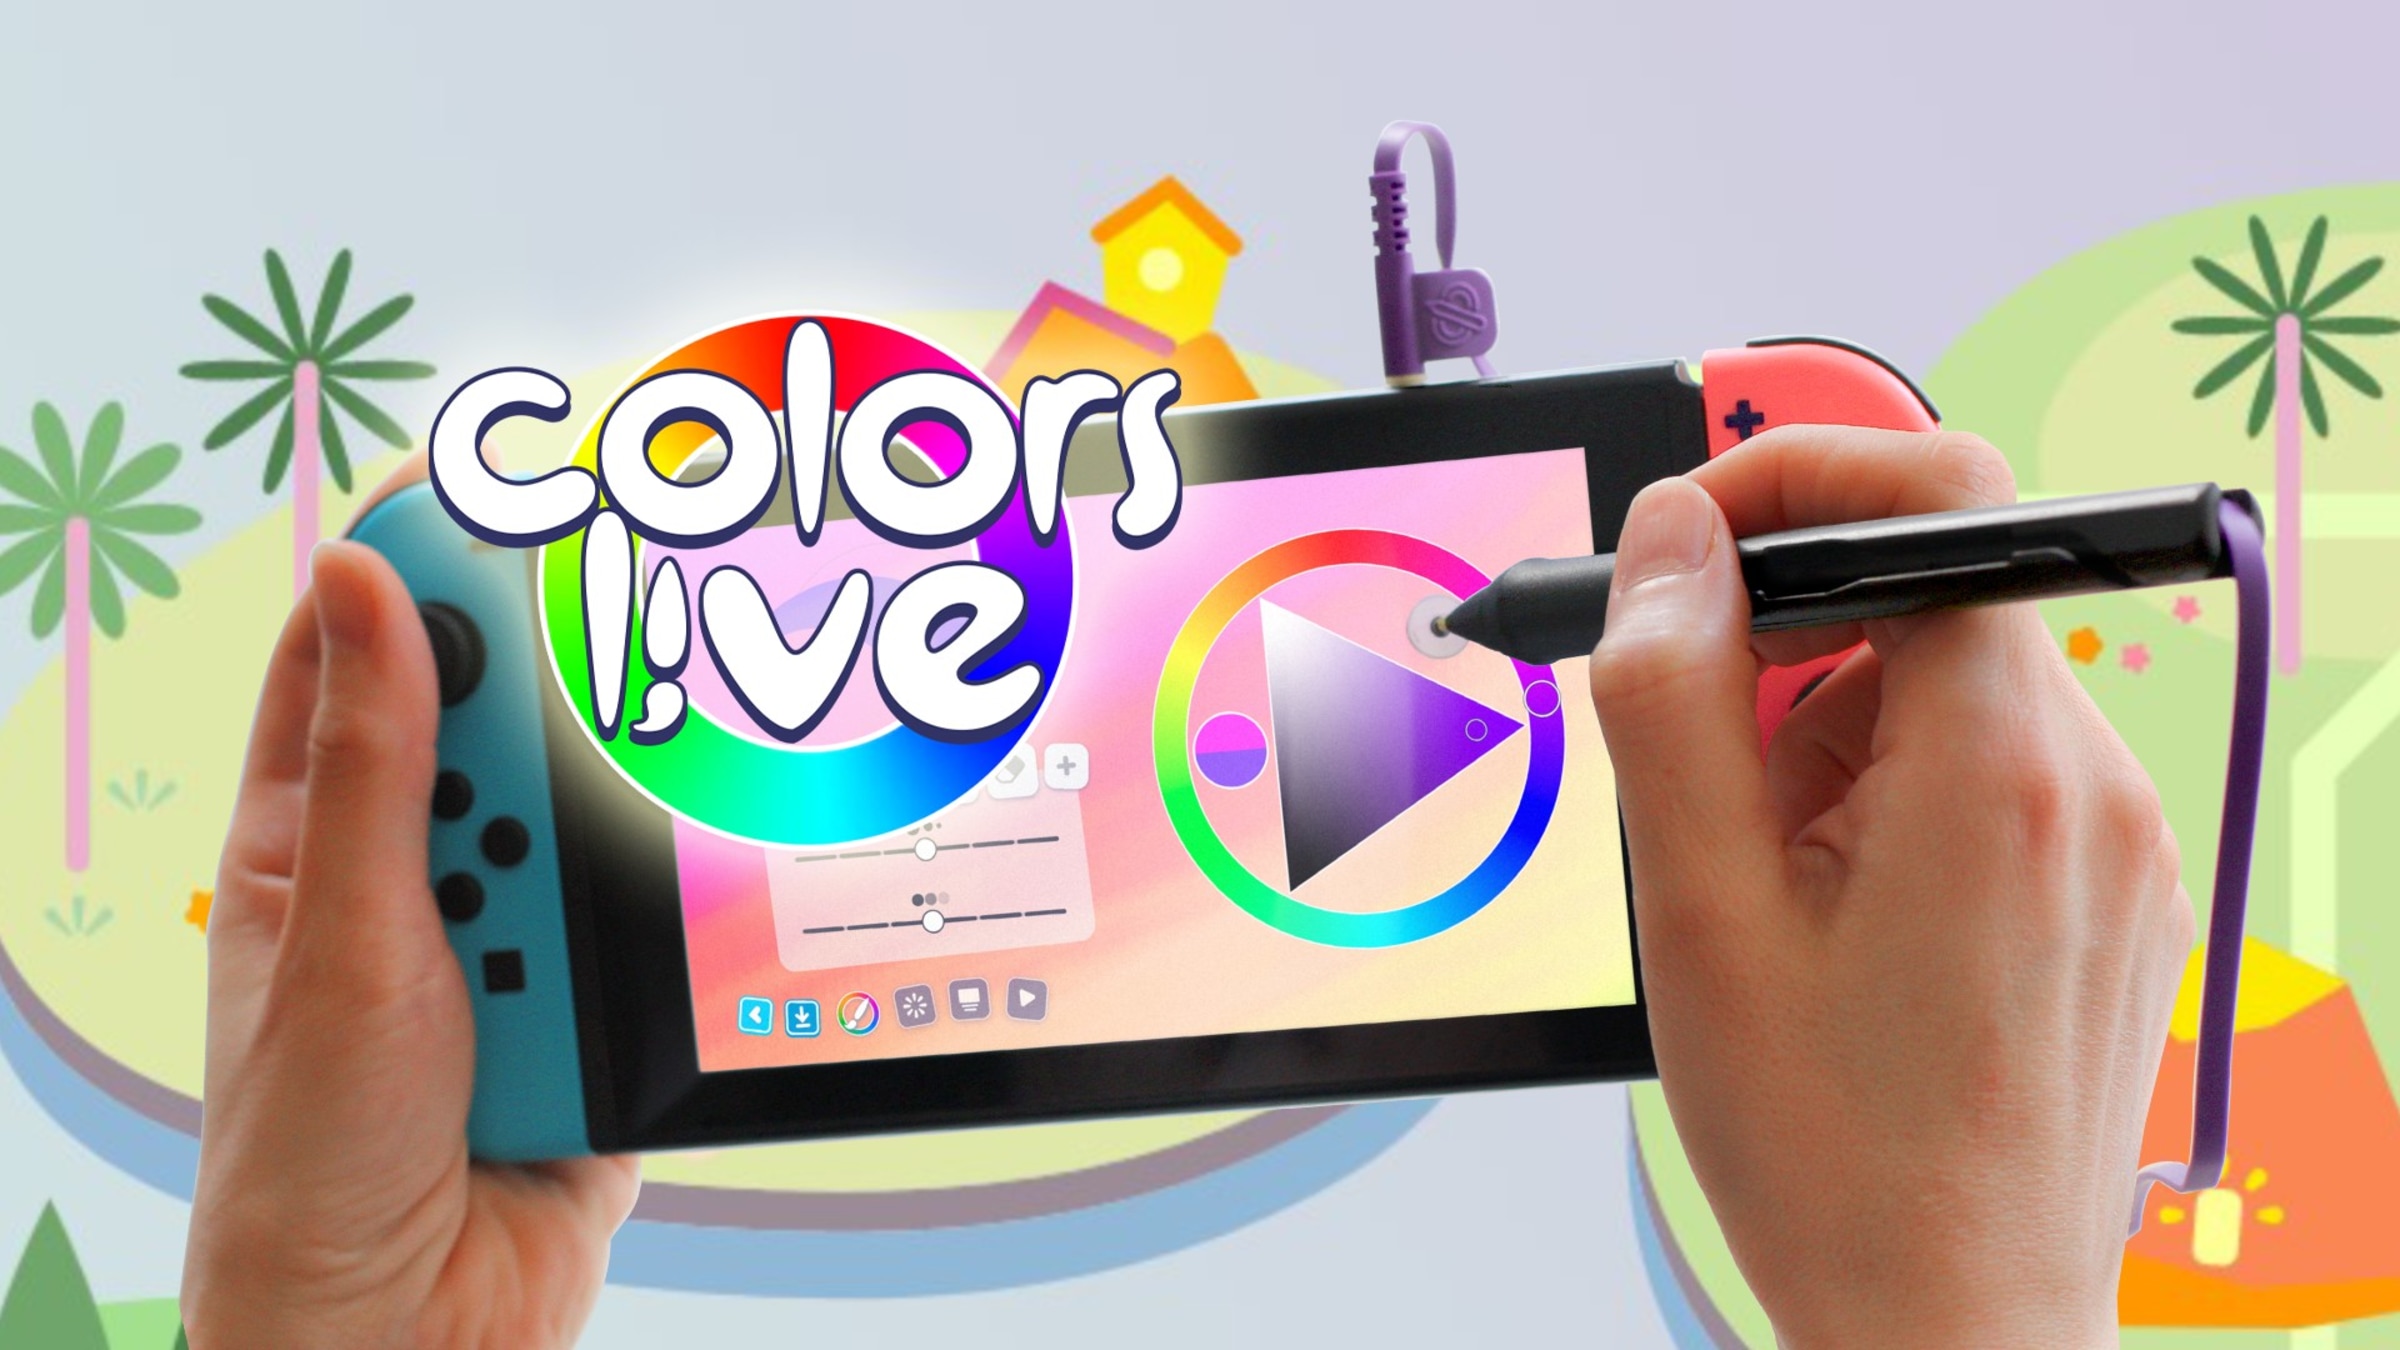 NS) Colors Live with Sonar Pen US